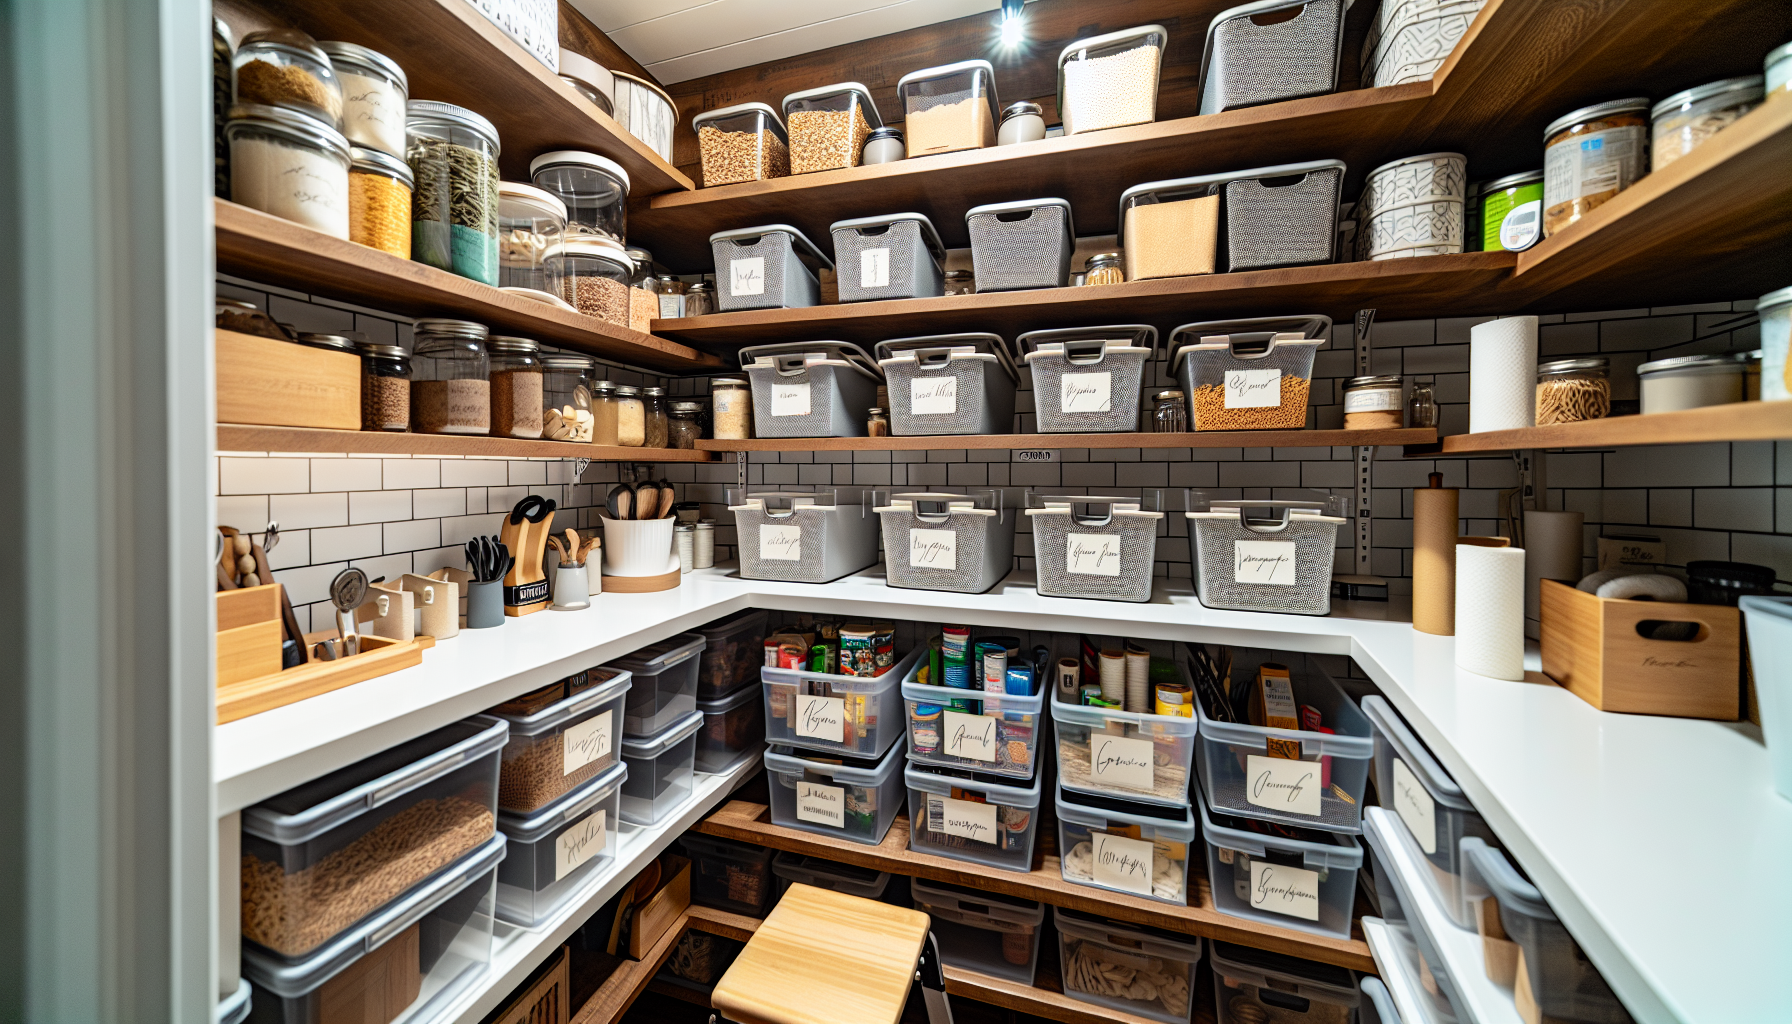 Selecting pantry enhancers for efficient organization in a walk-in pantry